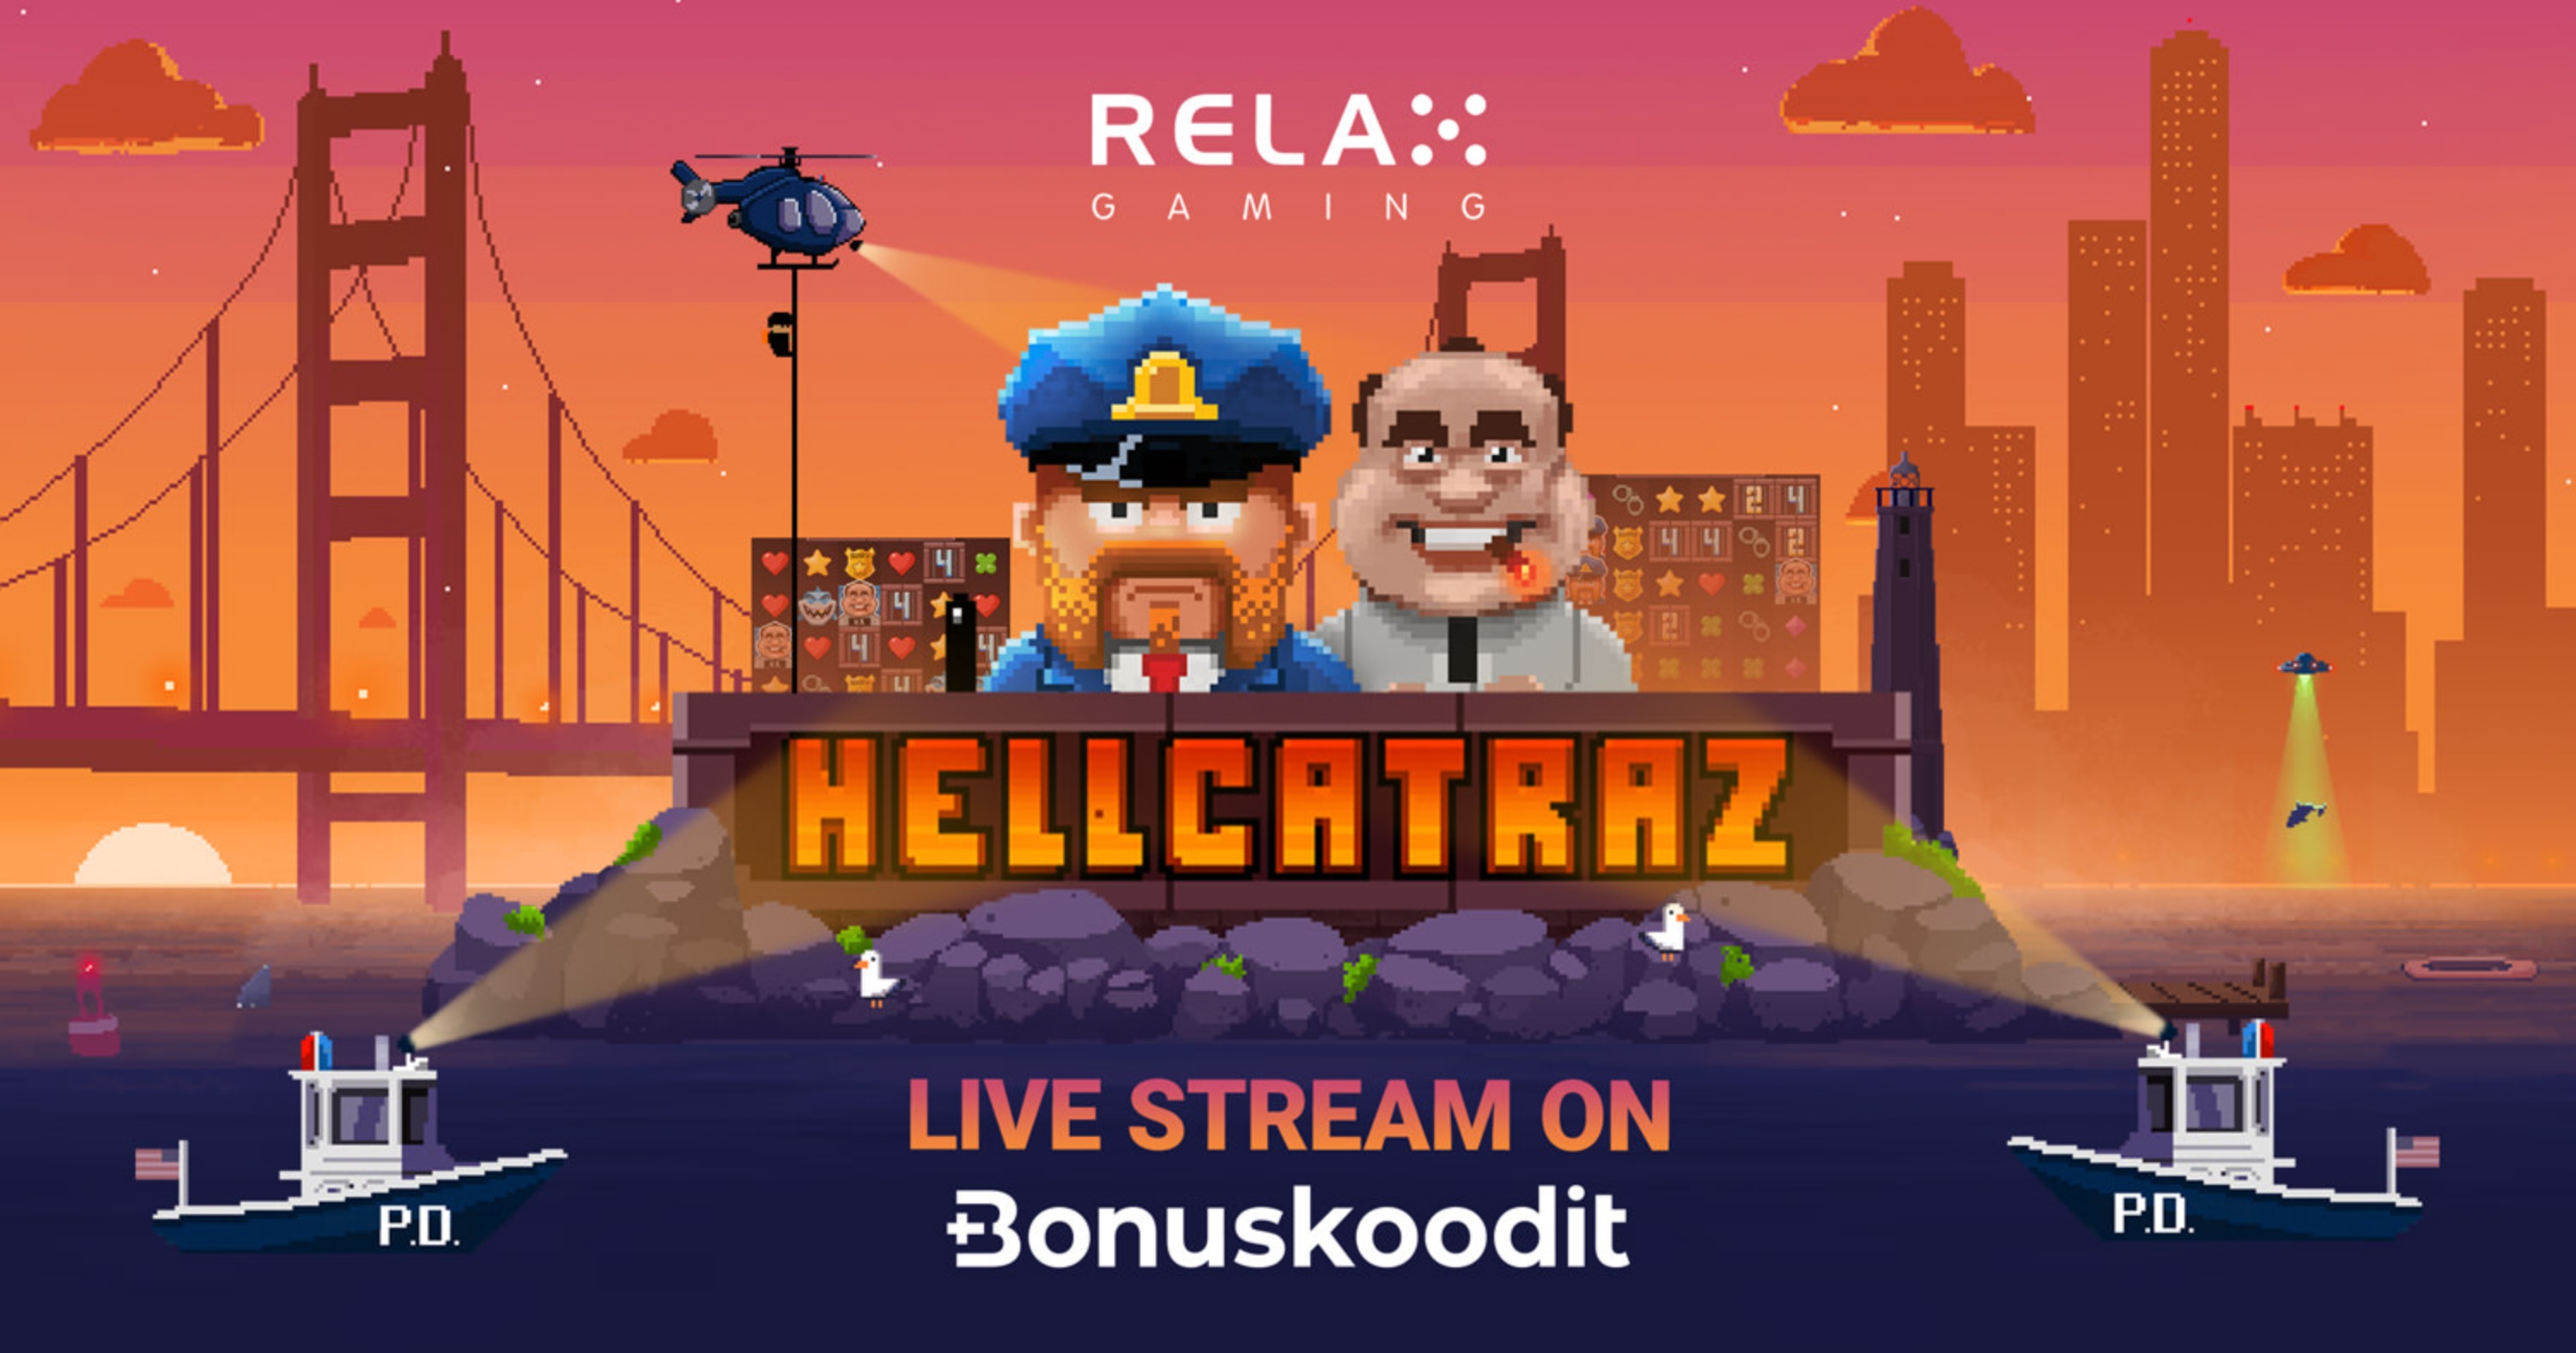 The Hellcatraz Online Slot Demo Game by Relax Gaming